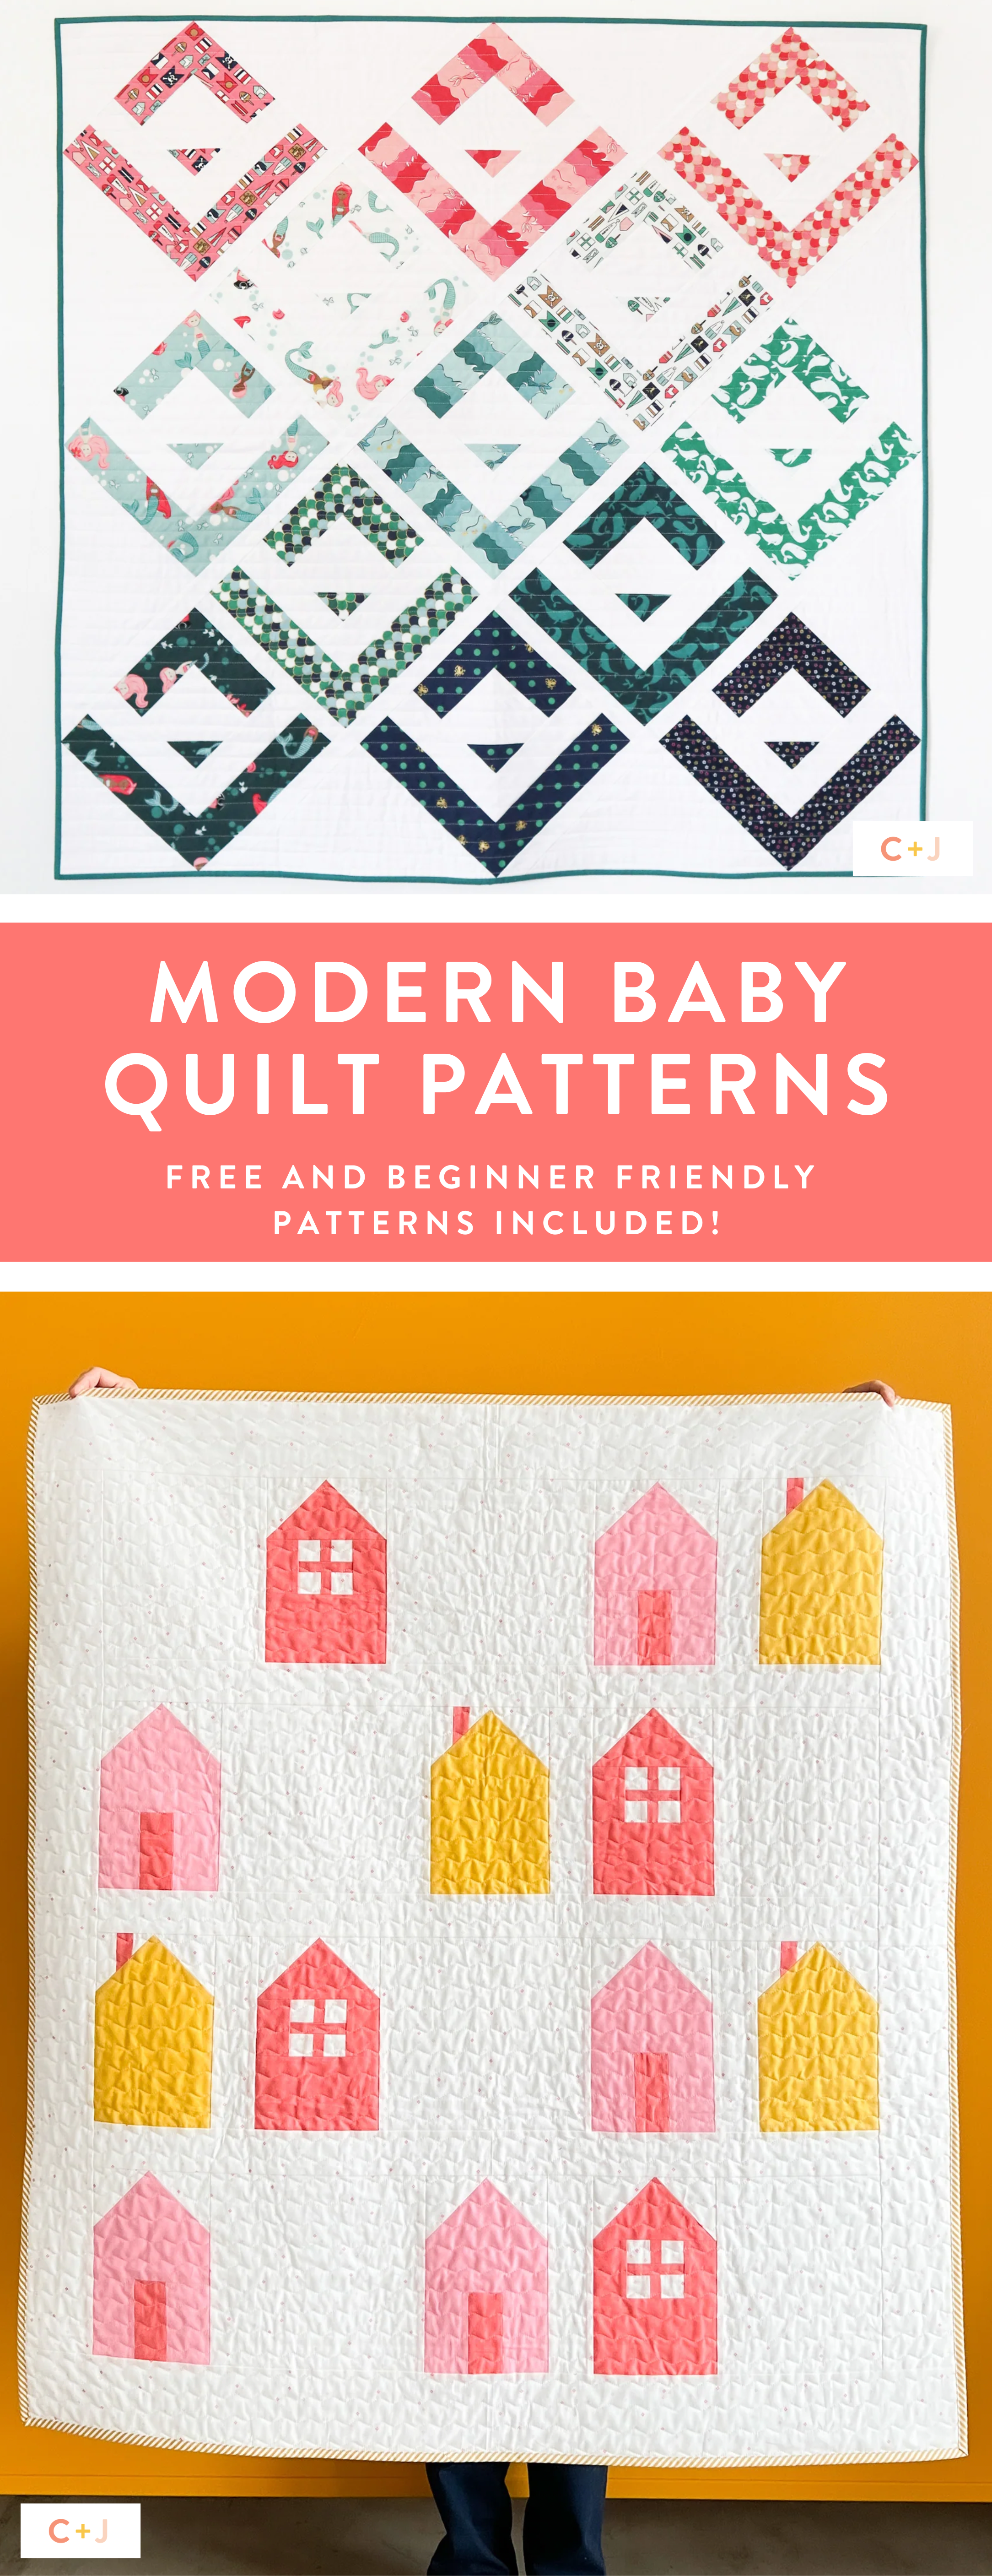 Modern Baby Quilt Patterns - Cotton and Joy